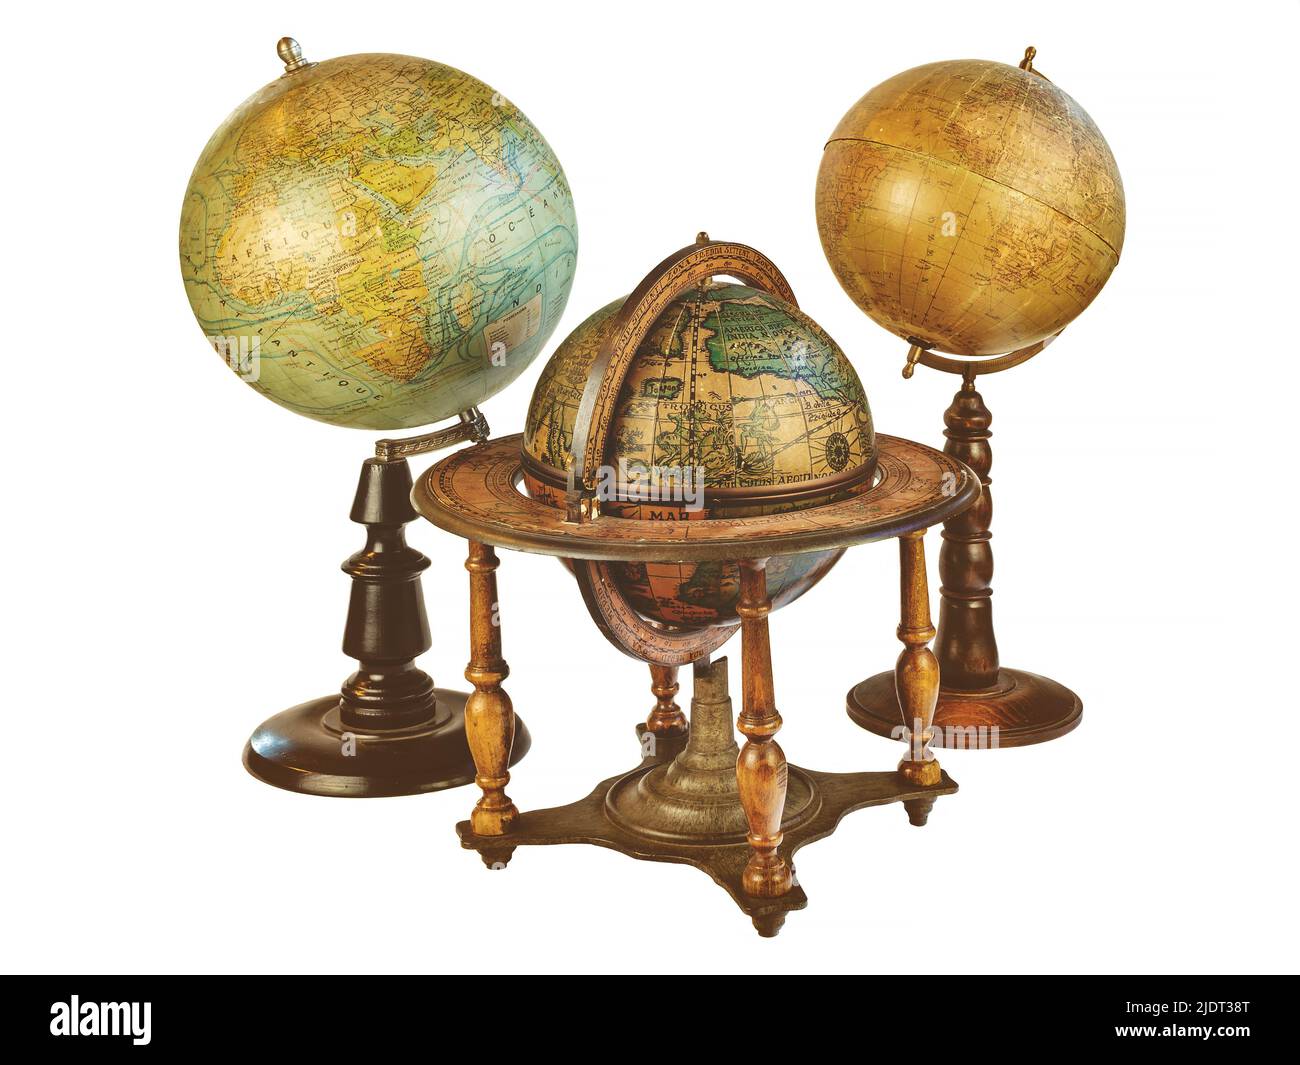 Three ancient world globes isolated on a white background Stock Photo